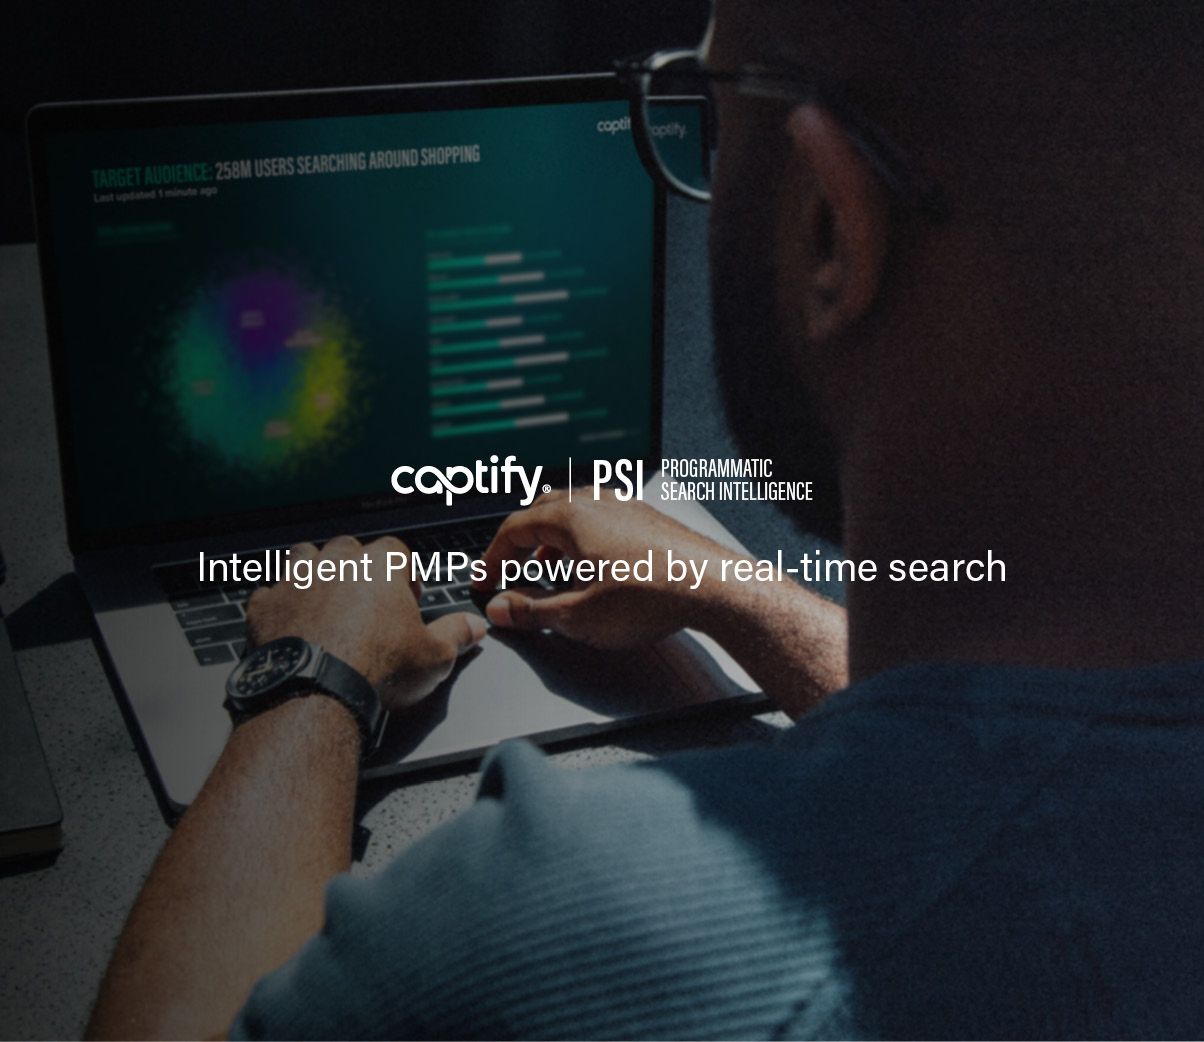 Captify’s Launch of Programmatic Search Intelligence (PSI) Marks Paradigm Shift in Programmatic Efficiency, By Making Dynamic and Live Search Data Available to Programmatic Buyers, Globally